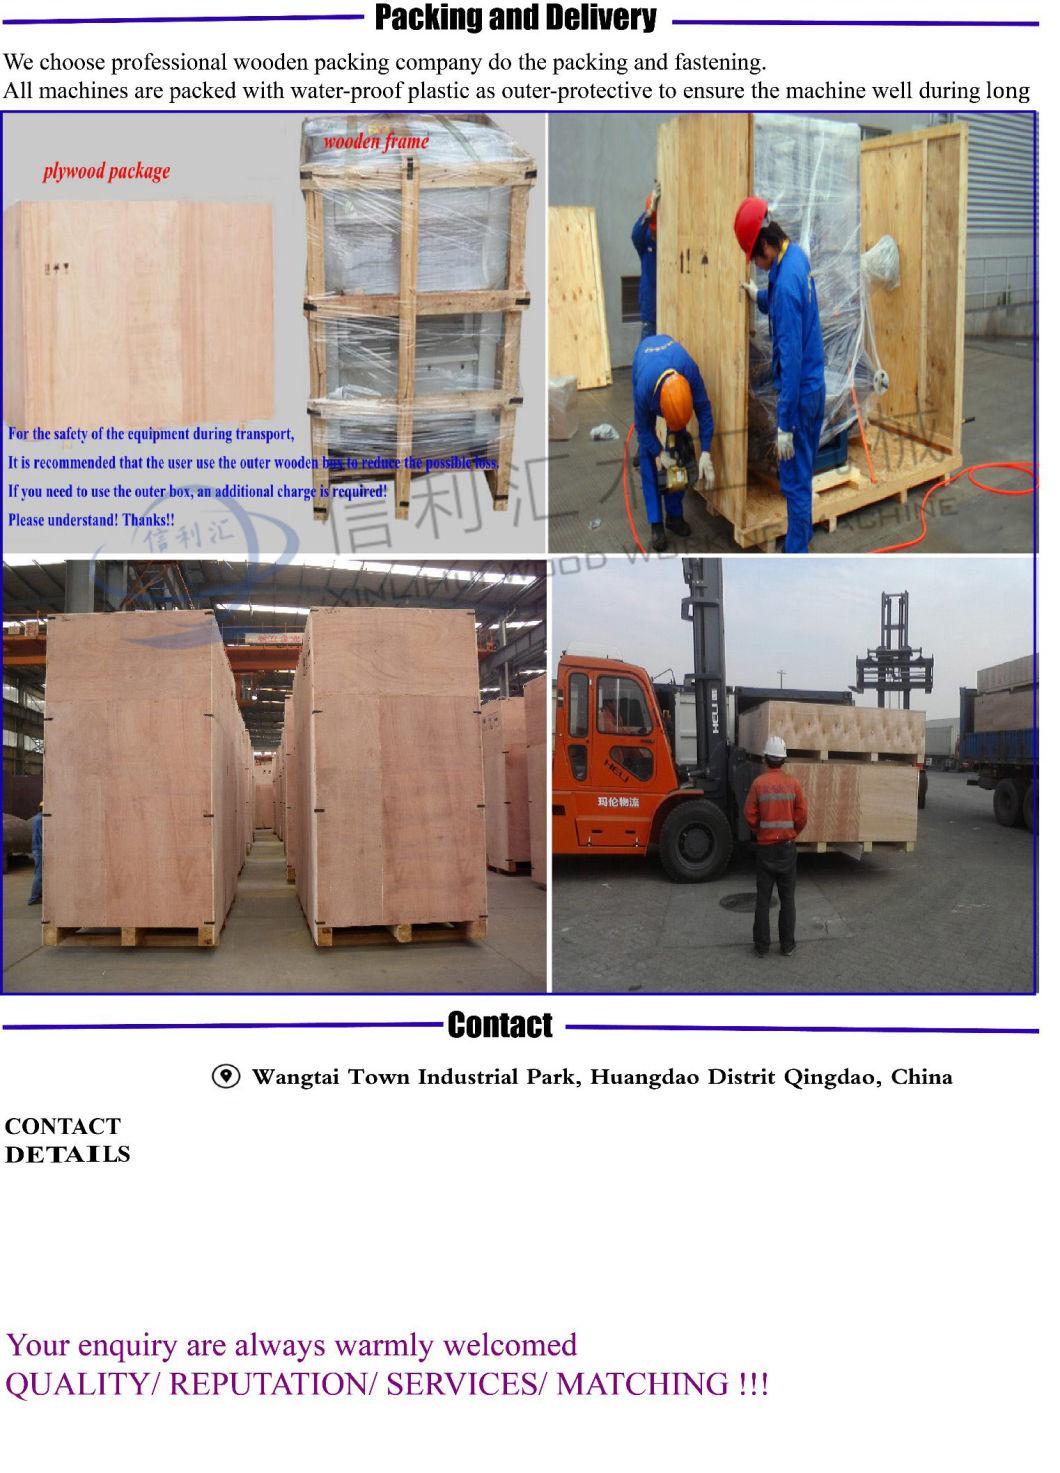 Hot Sale Automatic Veneer Jointing Machine Wood Stave Jointing Machine/ Wood Stave Jointing Machine with Cheap Price for Building Film Faced Plywood,